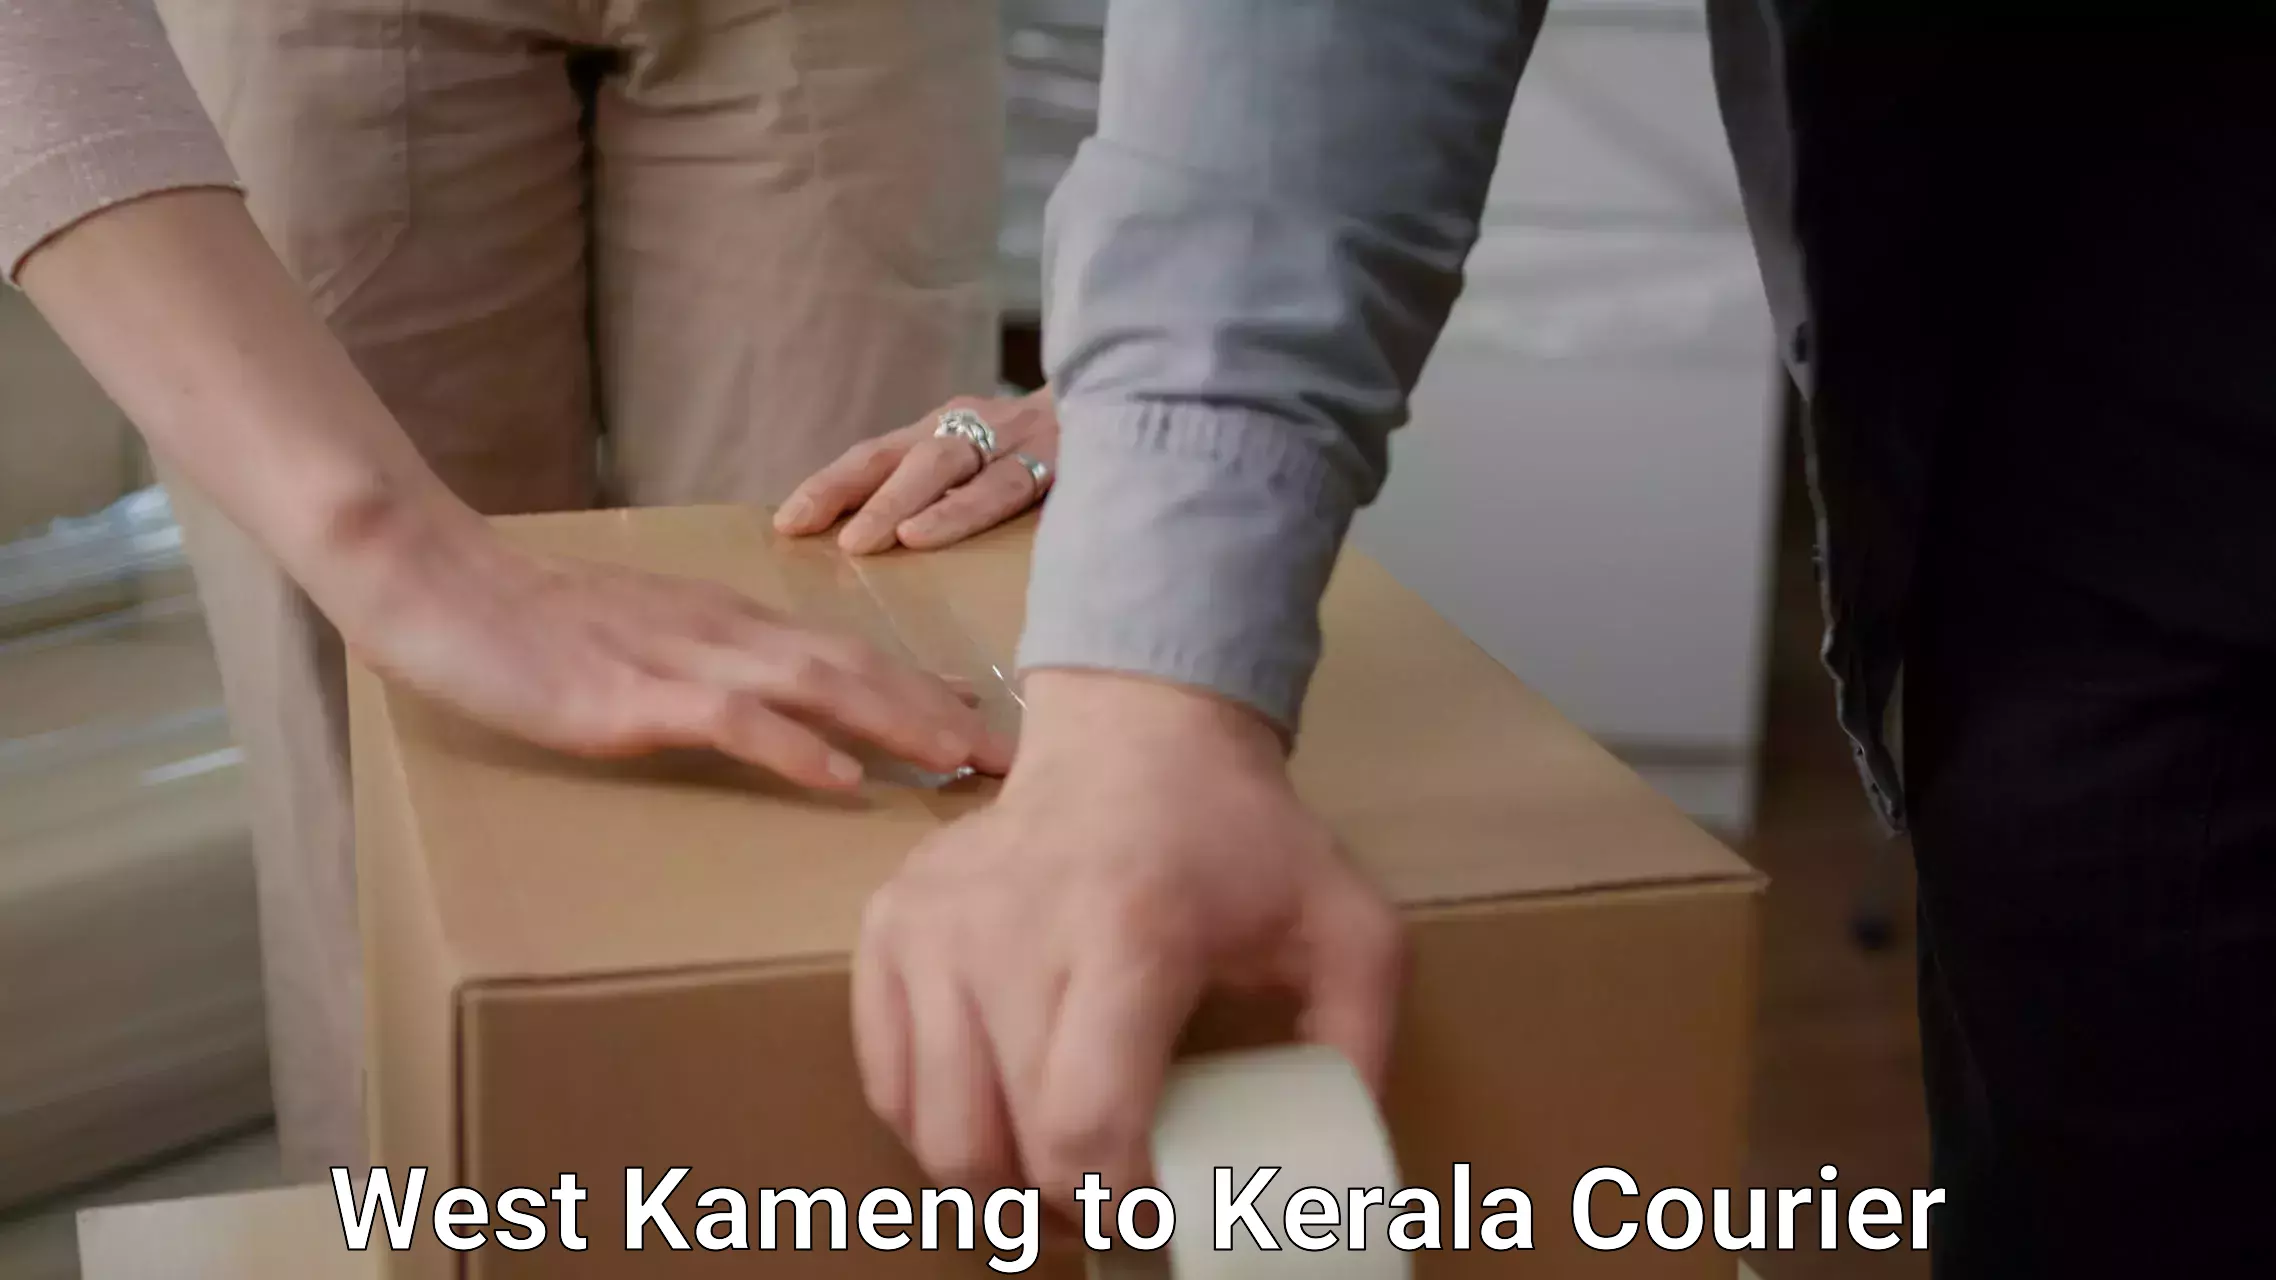 Furniture transport company West Kameng to Parappa